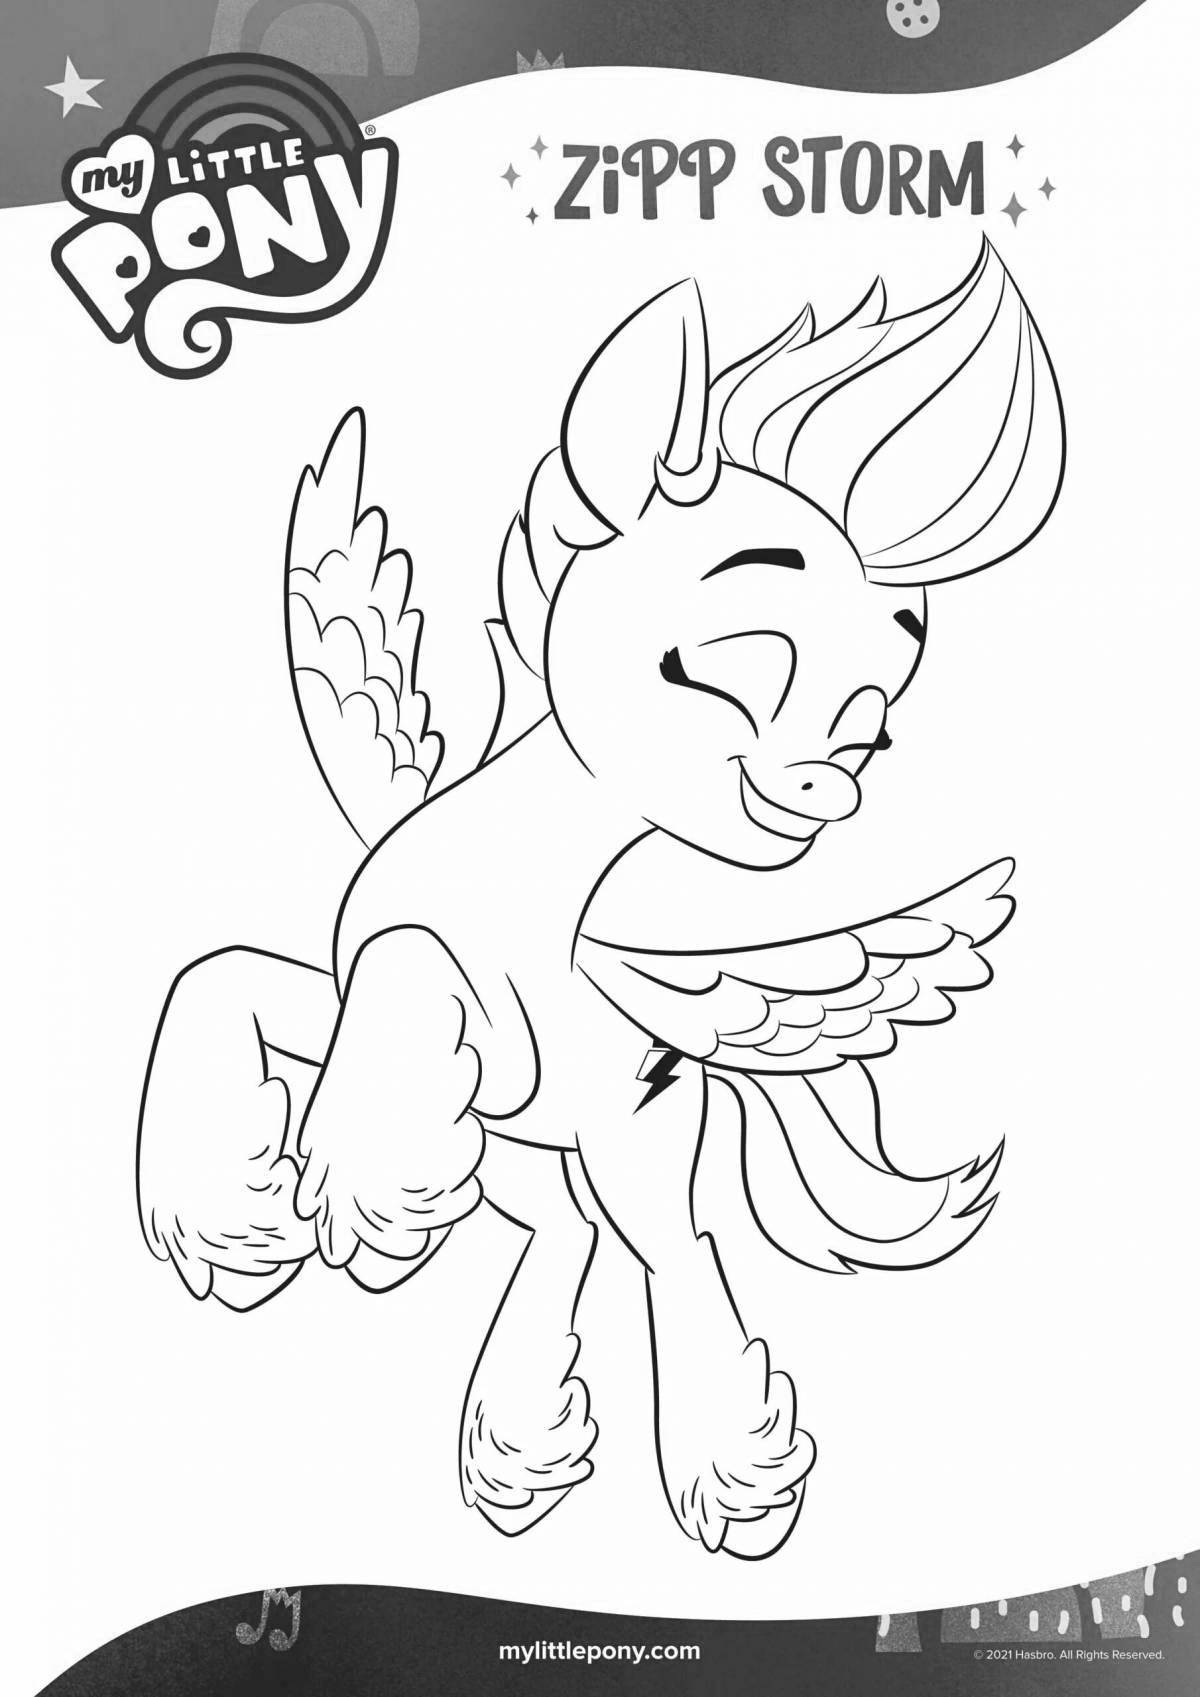 Playful easy pony coloring page